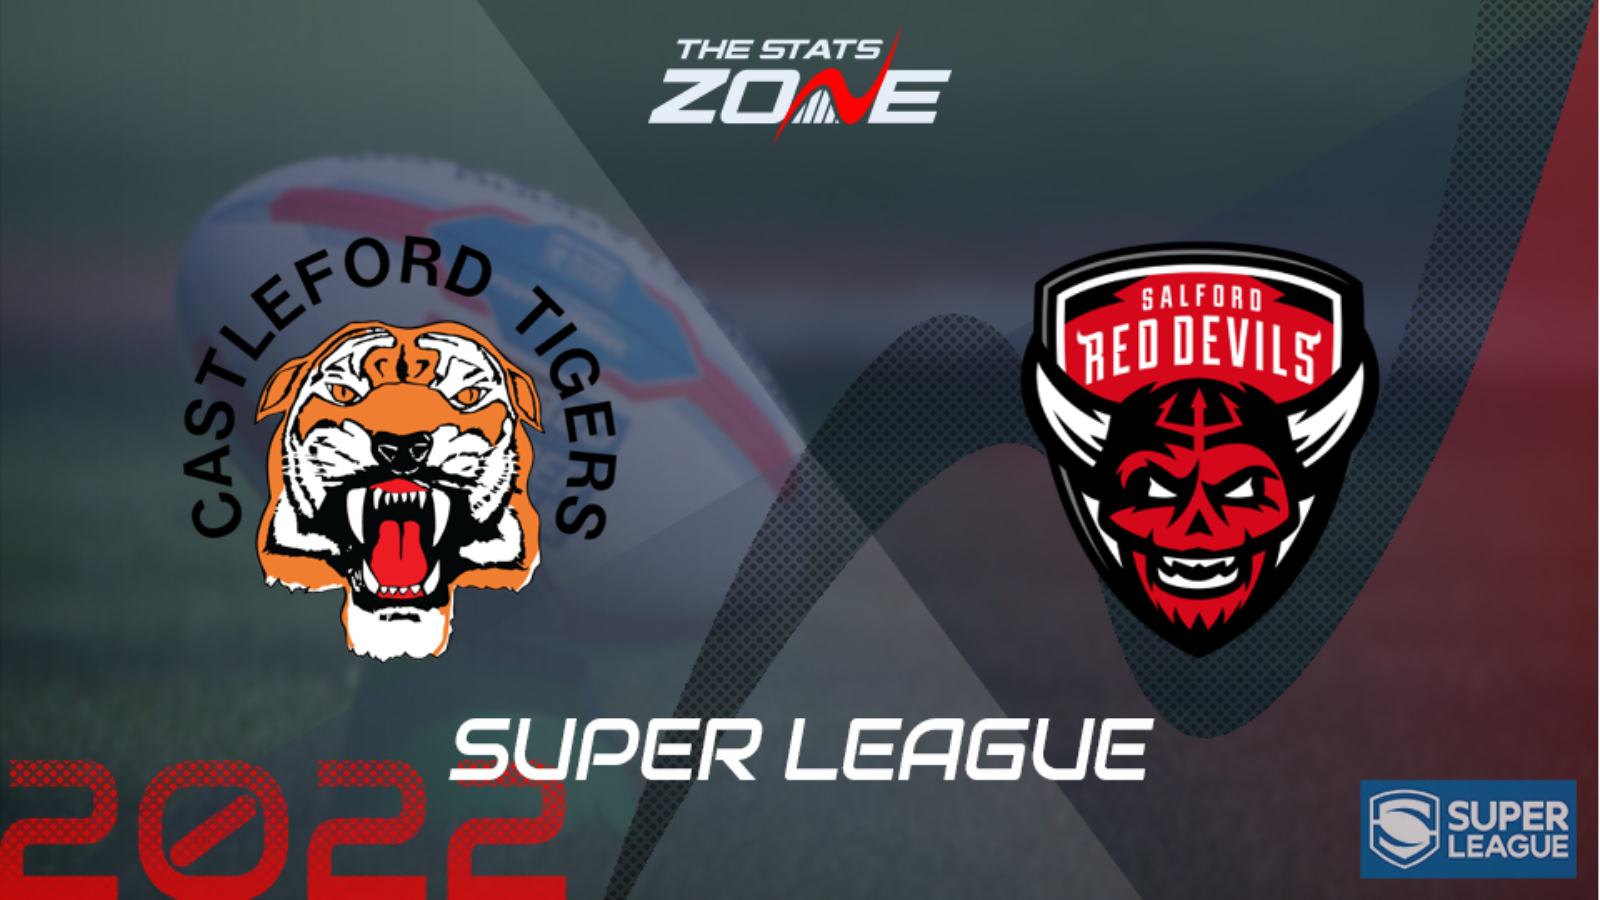 Castleford Tigers vs Salford Red Devils Preview and Prediction Super League 2022